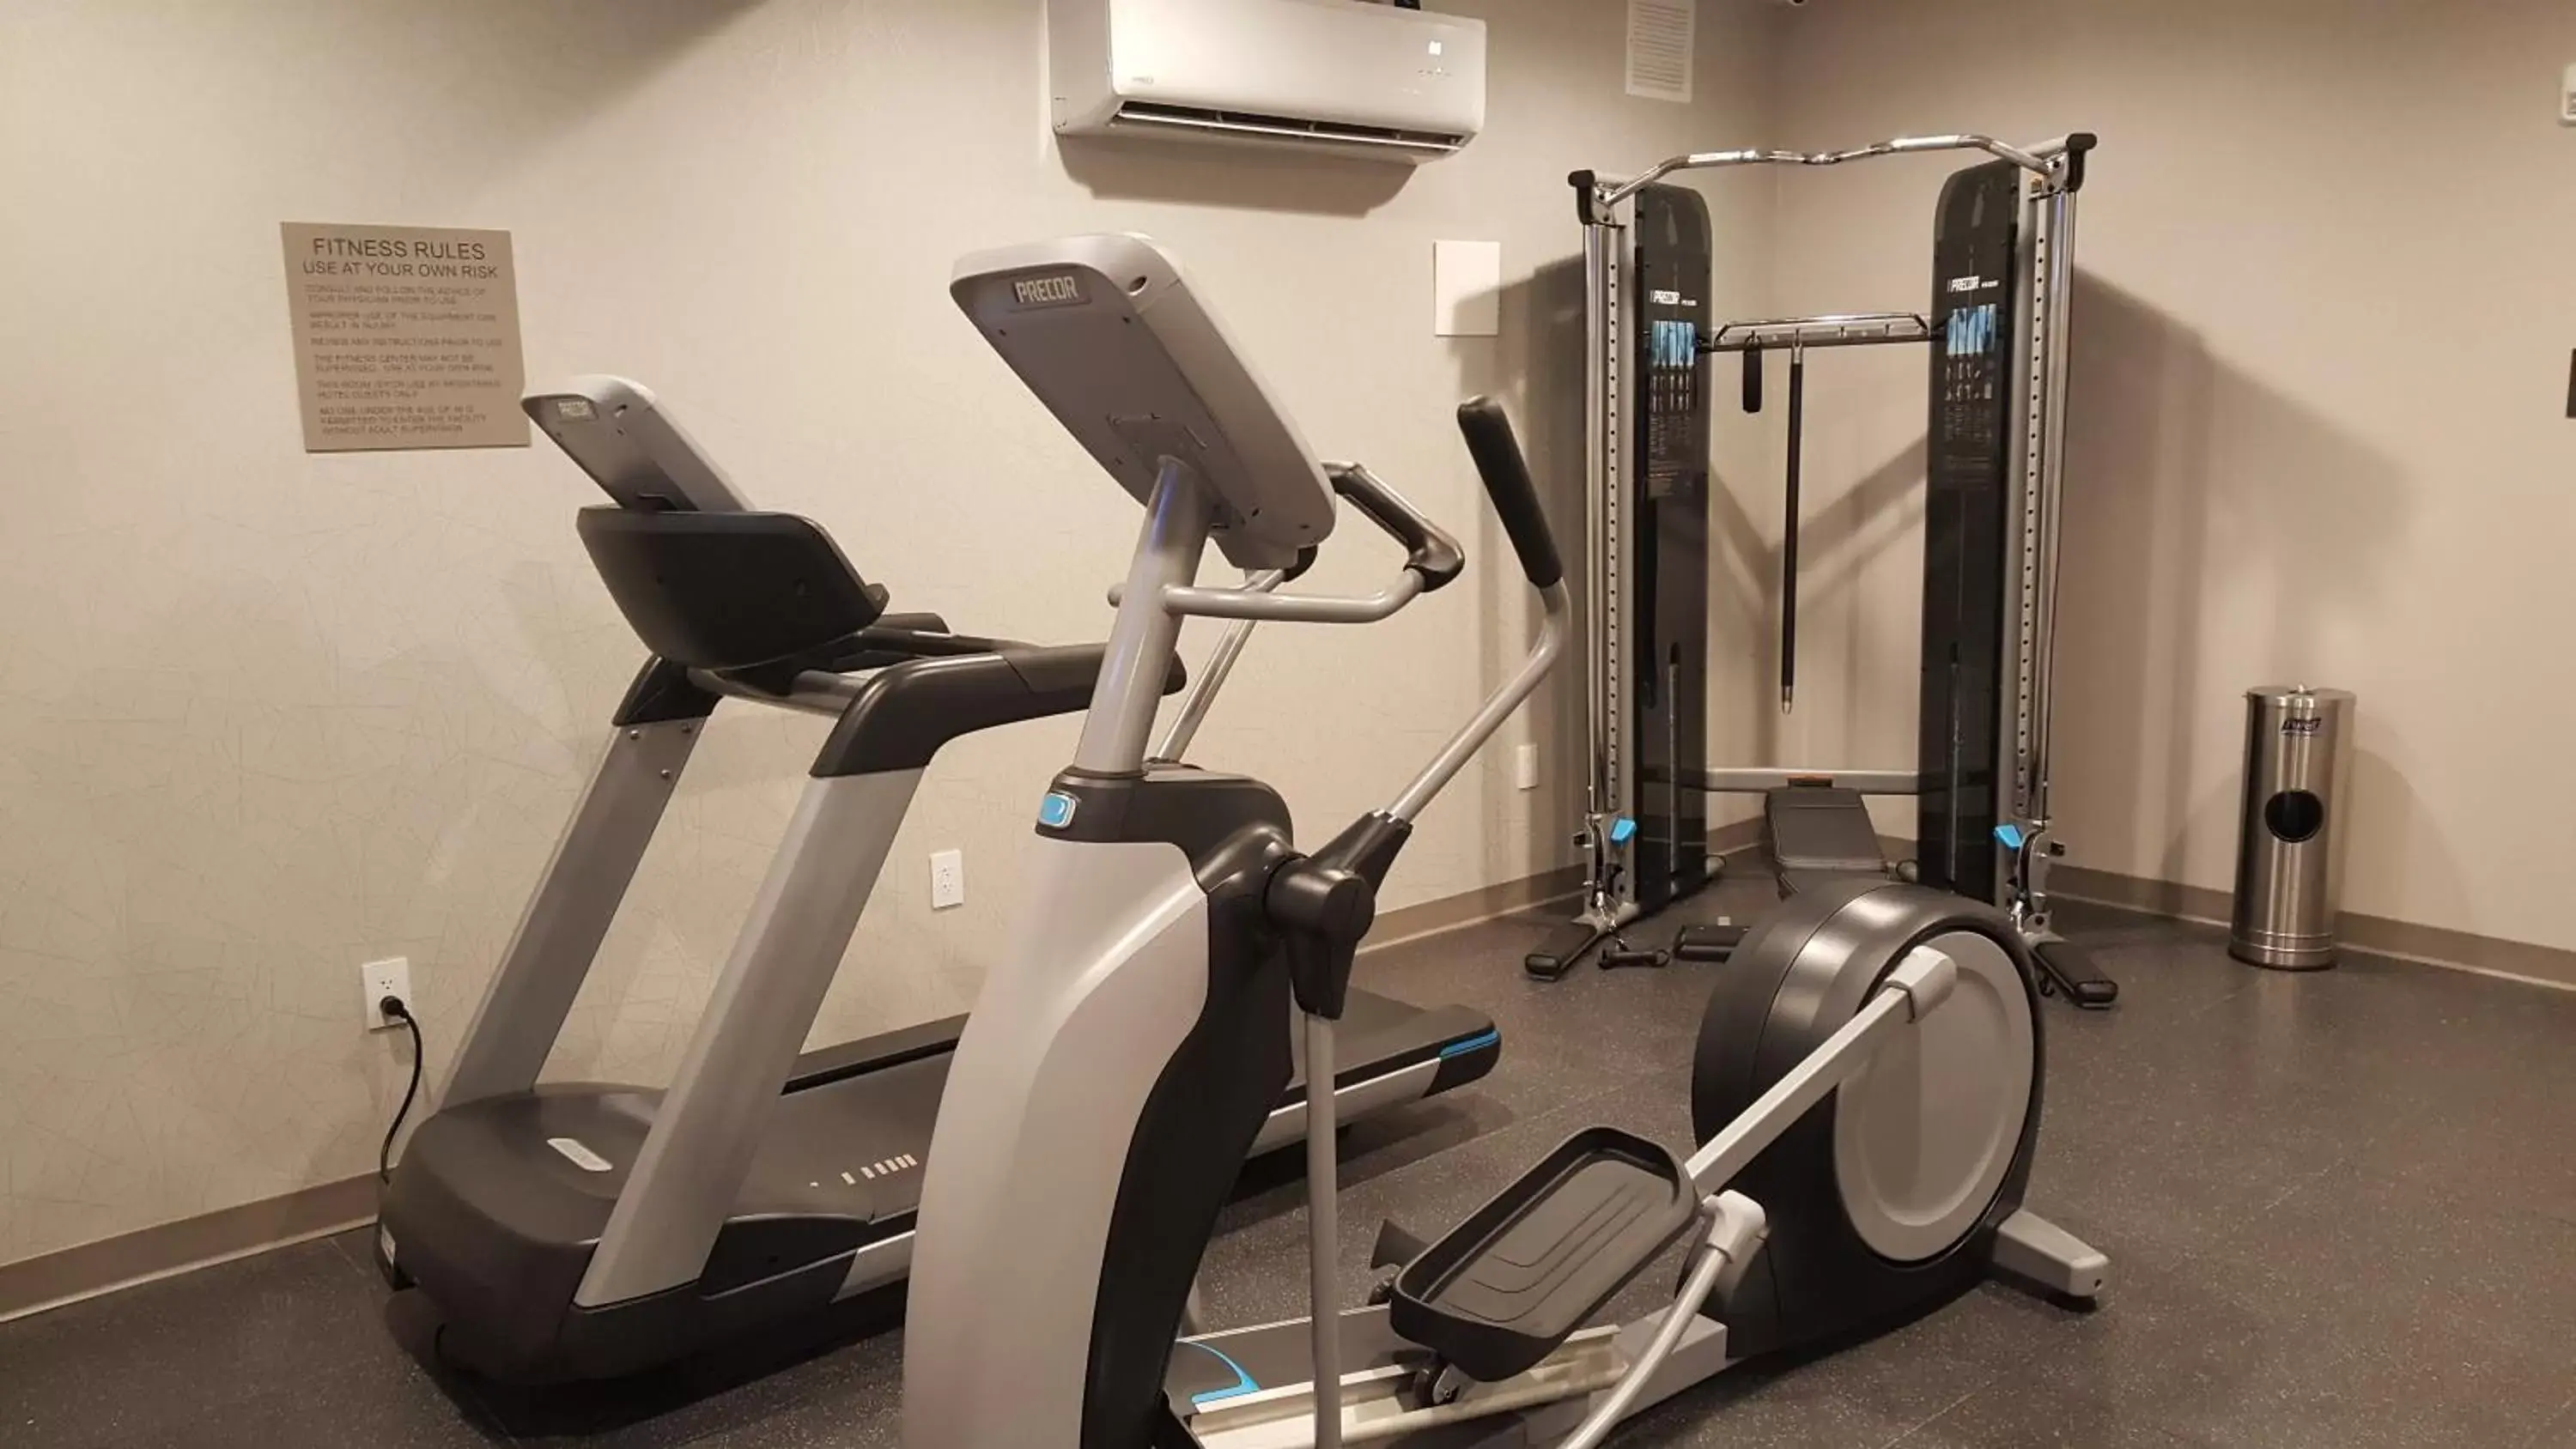 Fitness centre/facilities, Fitness Center/Facilities in Country Inn & Suites by Radisson, Savannah Midtown, GA